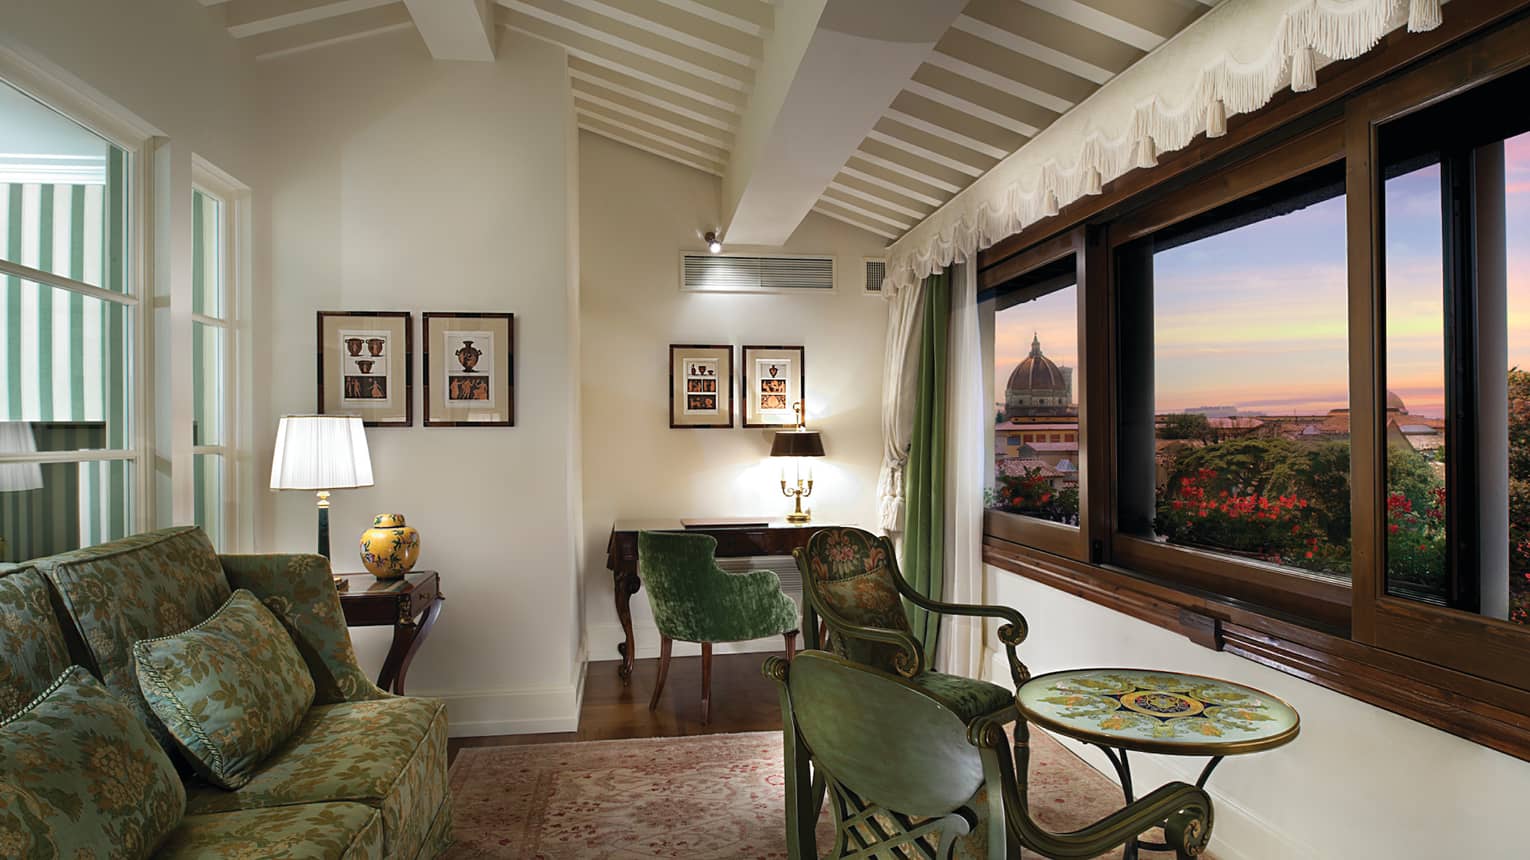 Duomo View Executive Suite green sofas, chairs and table by large picture window overlooking Florence, sunset